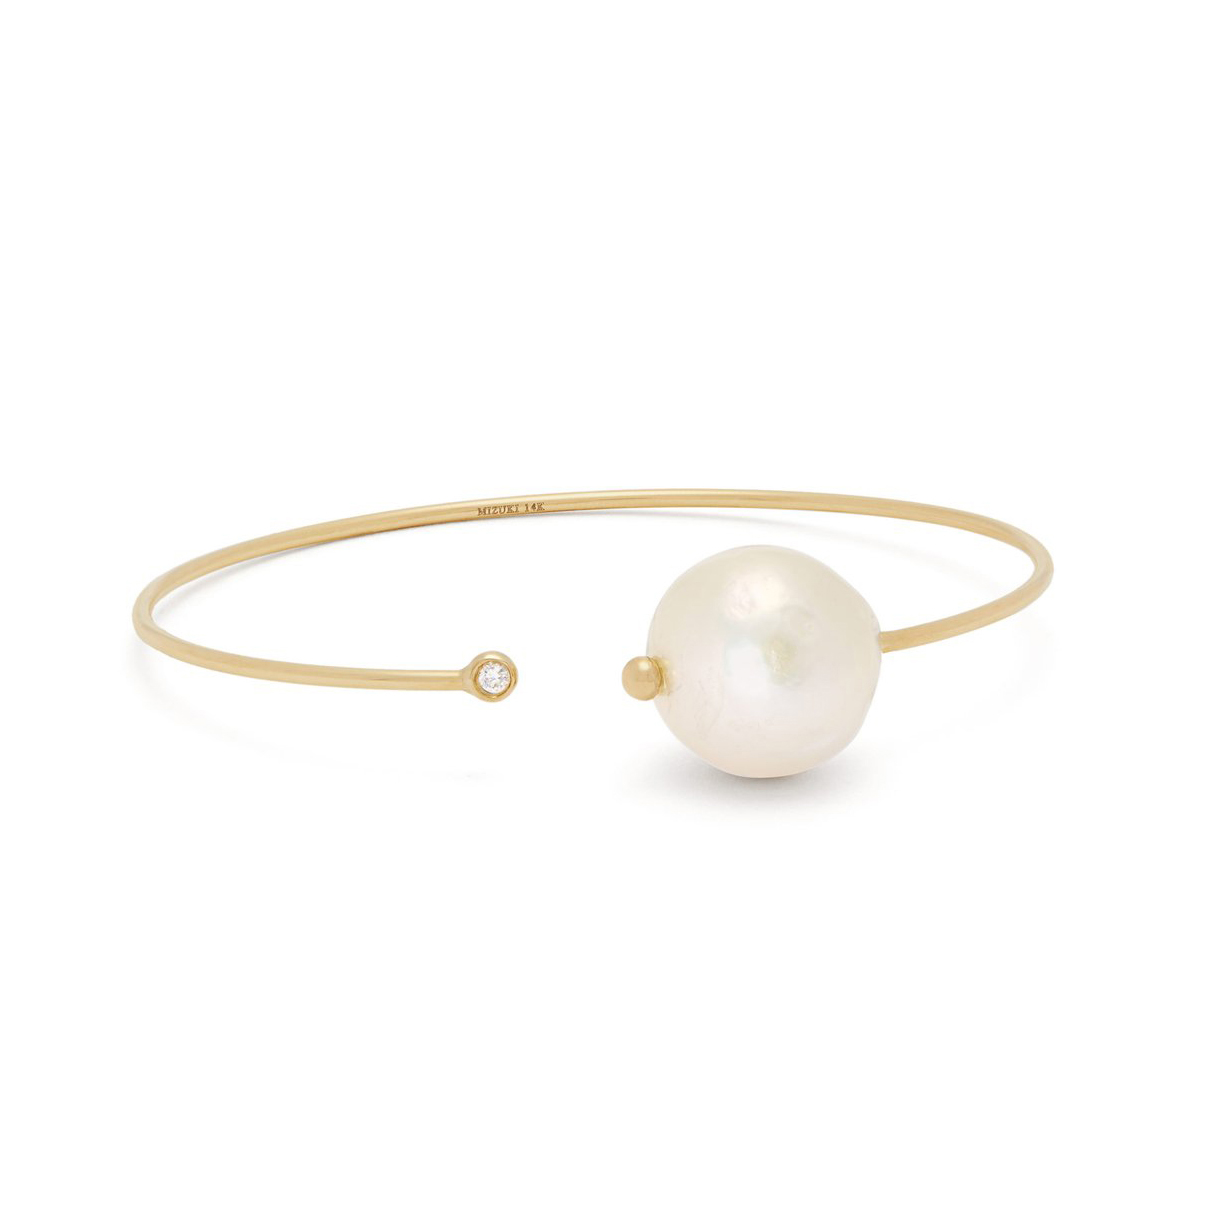 MOTHER'S DAY JEWELLERY GIFT GUIDE - GEMOLOGUE by Liza Urla